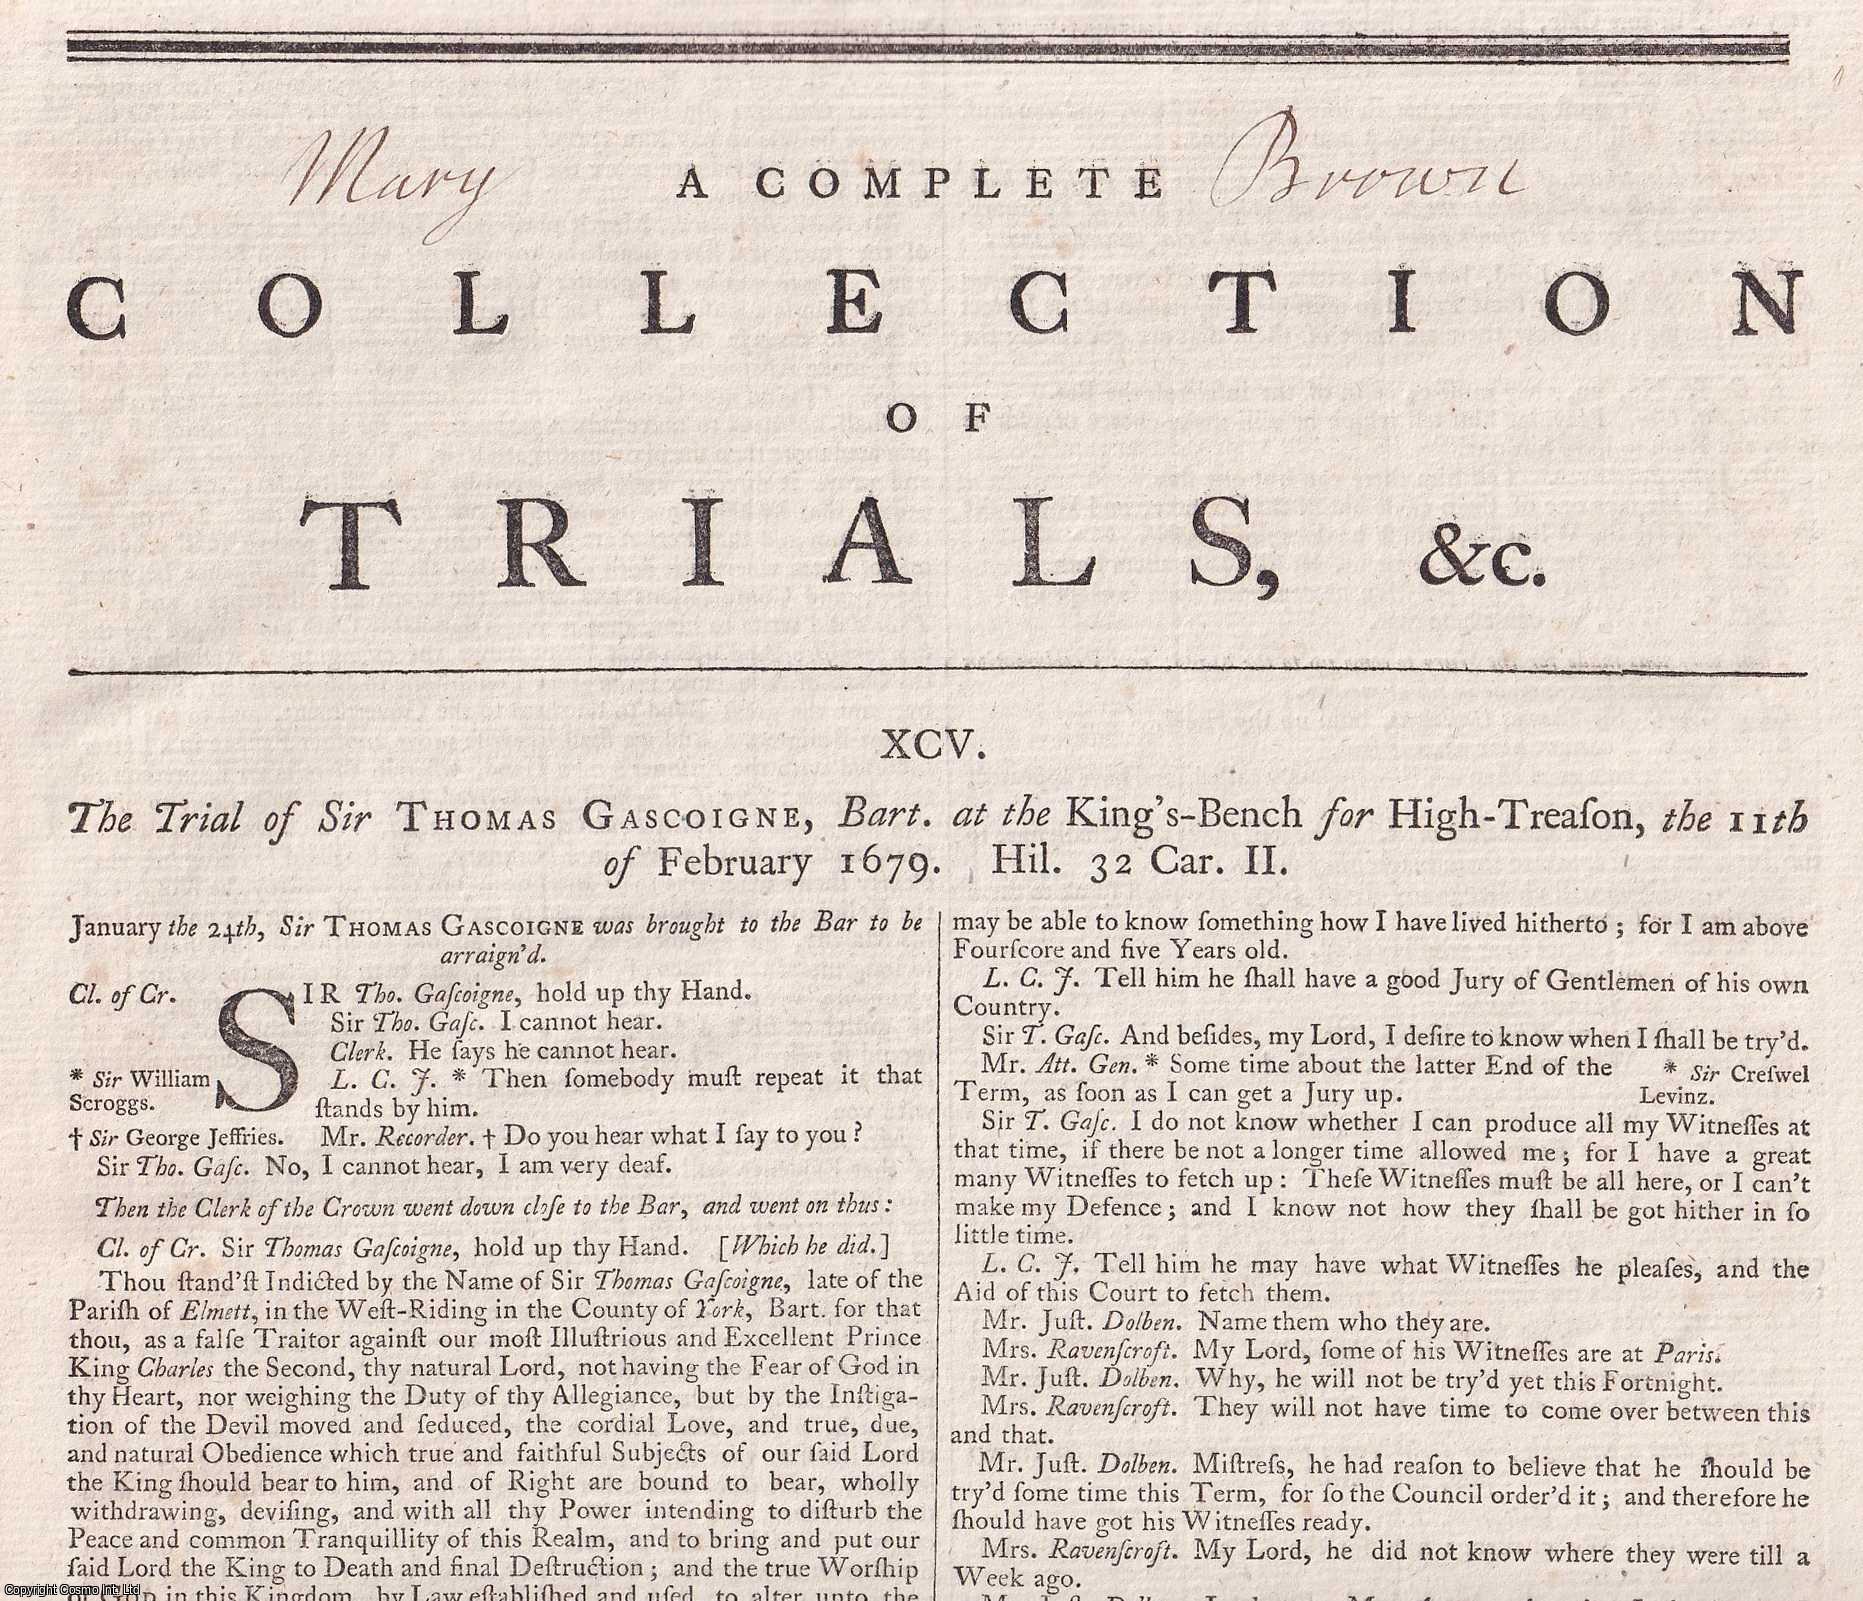 [Trial] - POPISH PLOT. The Trial of Sir Thomas Gasgoigne, at The King's Bench For High Treason, 1679. An original article from the Collected State Trials.